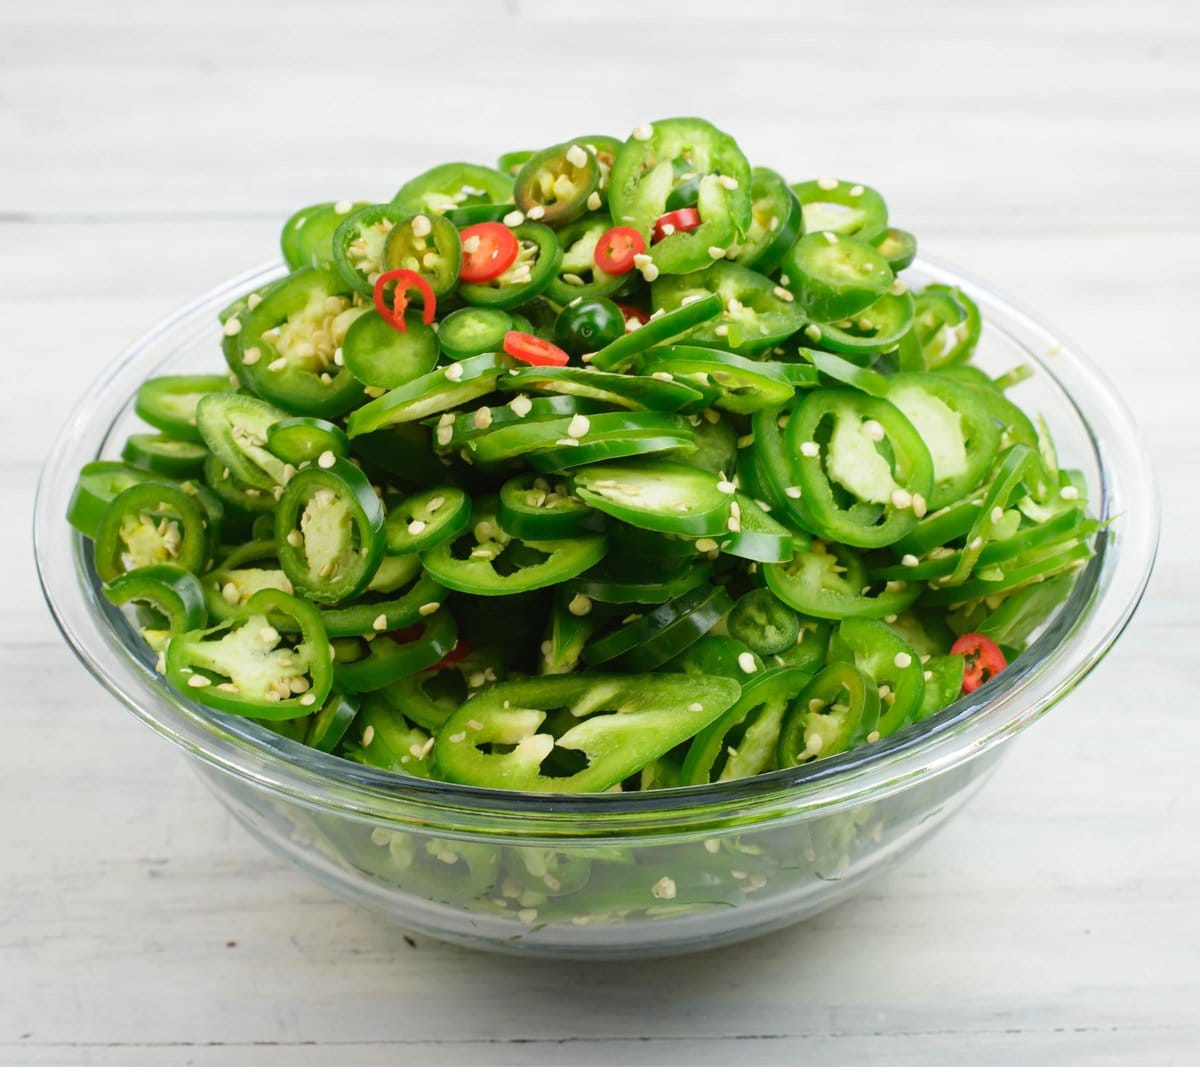 3 lbs. of sliced jalapeno peppers in a bowl.